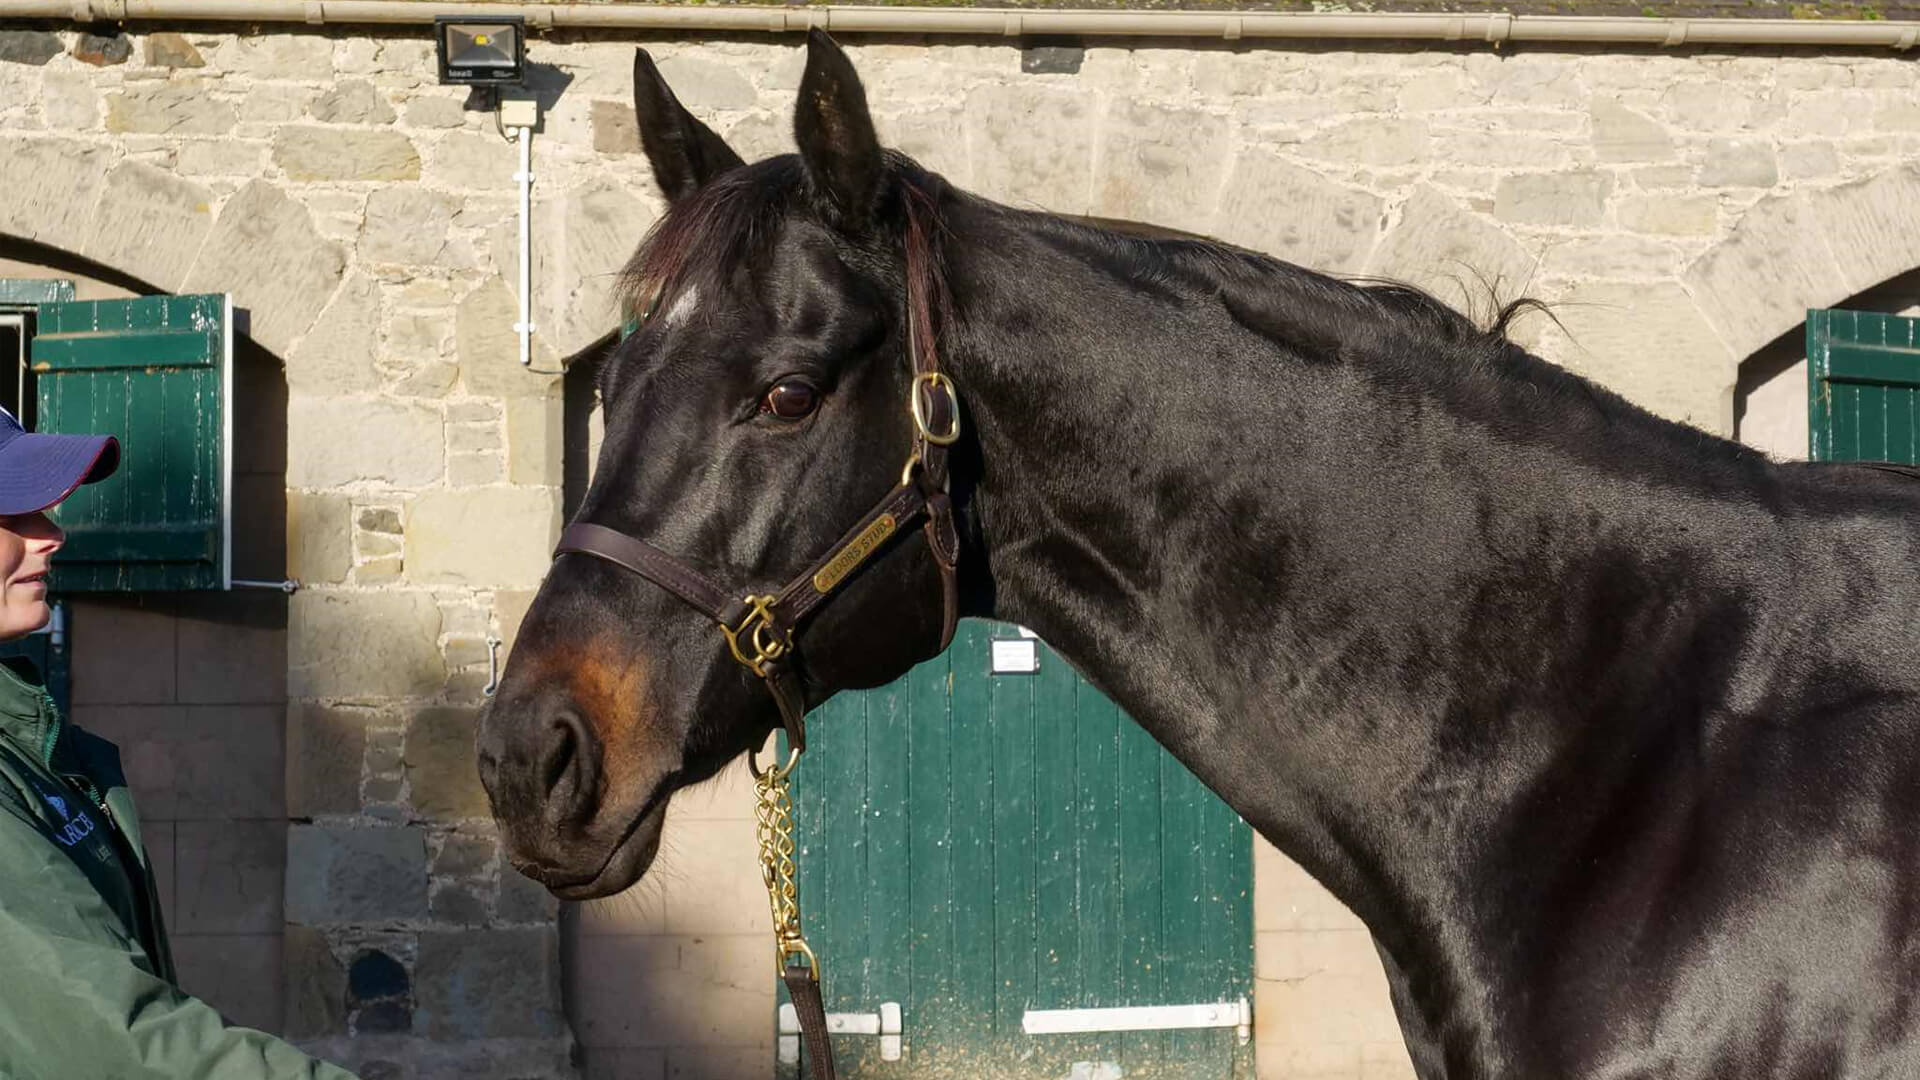 Fusion will be offered at Tattersalls on 1st December 2020.